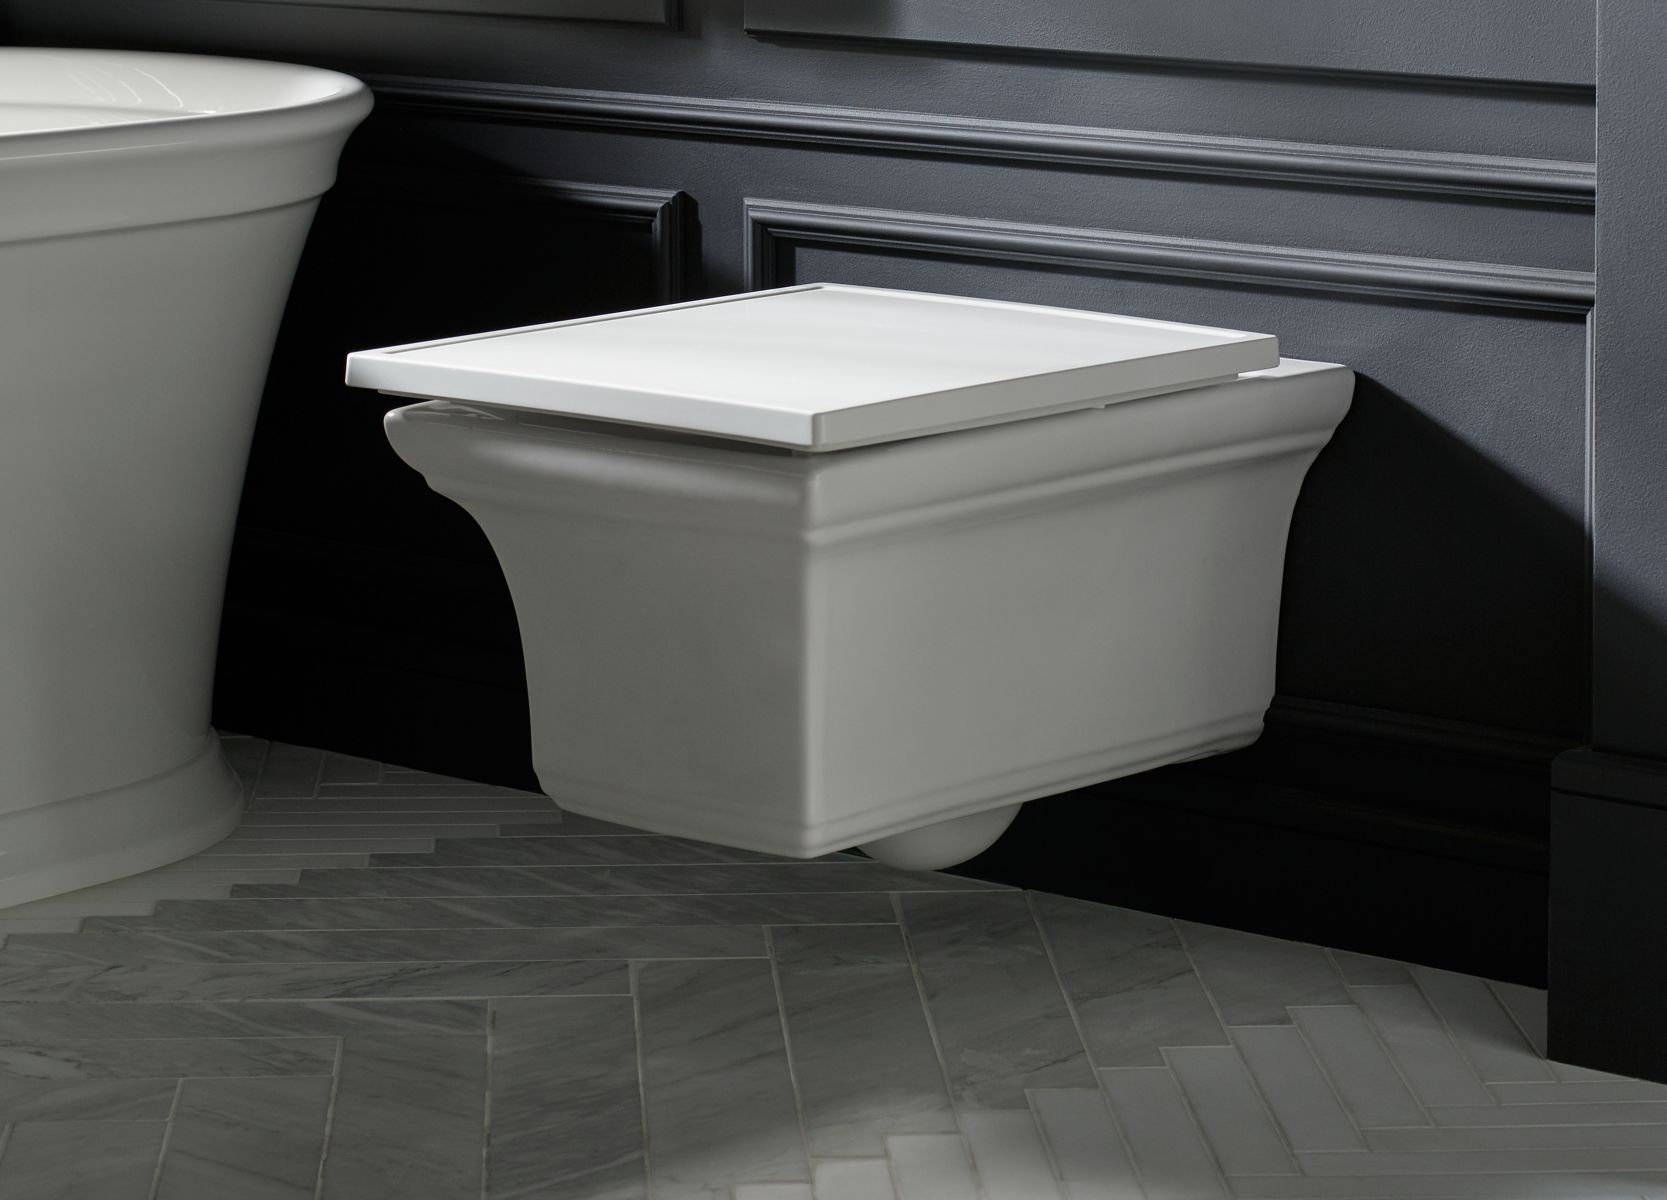 Featured image of post Wall Hung Toilet Side View / See more of wall hung toilet on facebook.